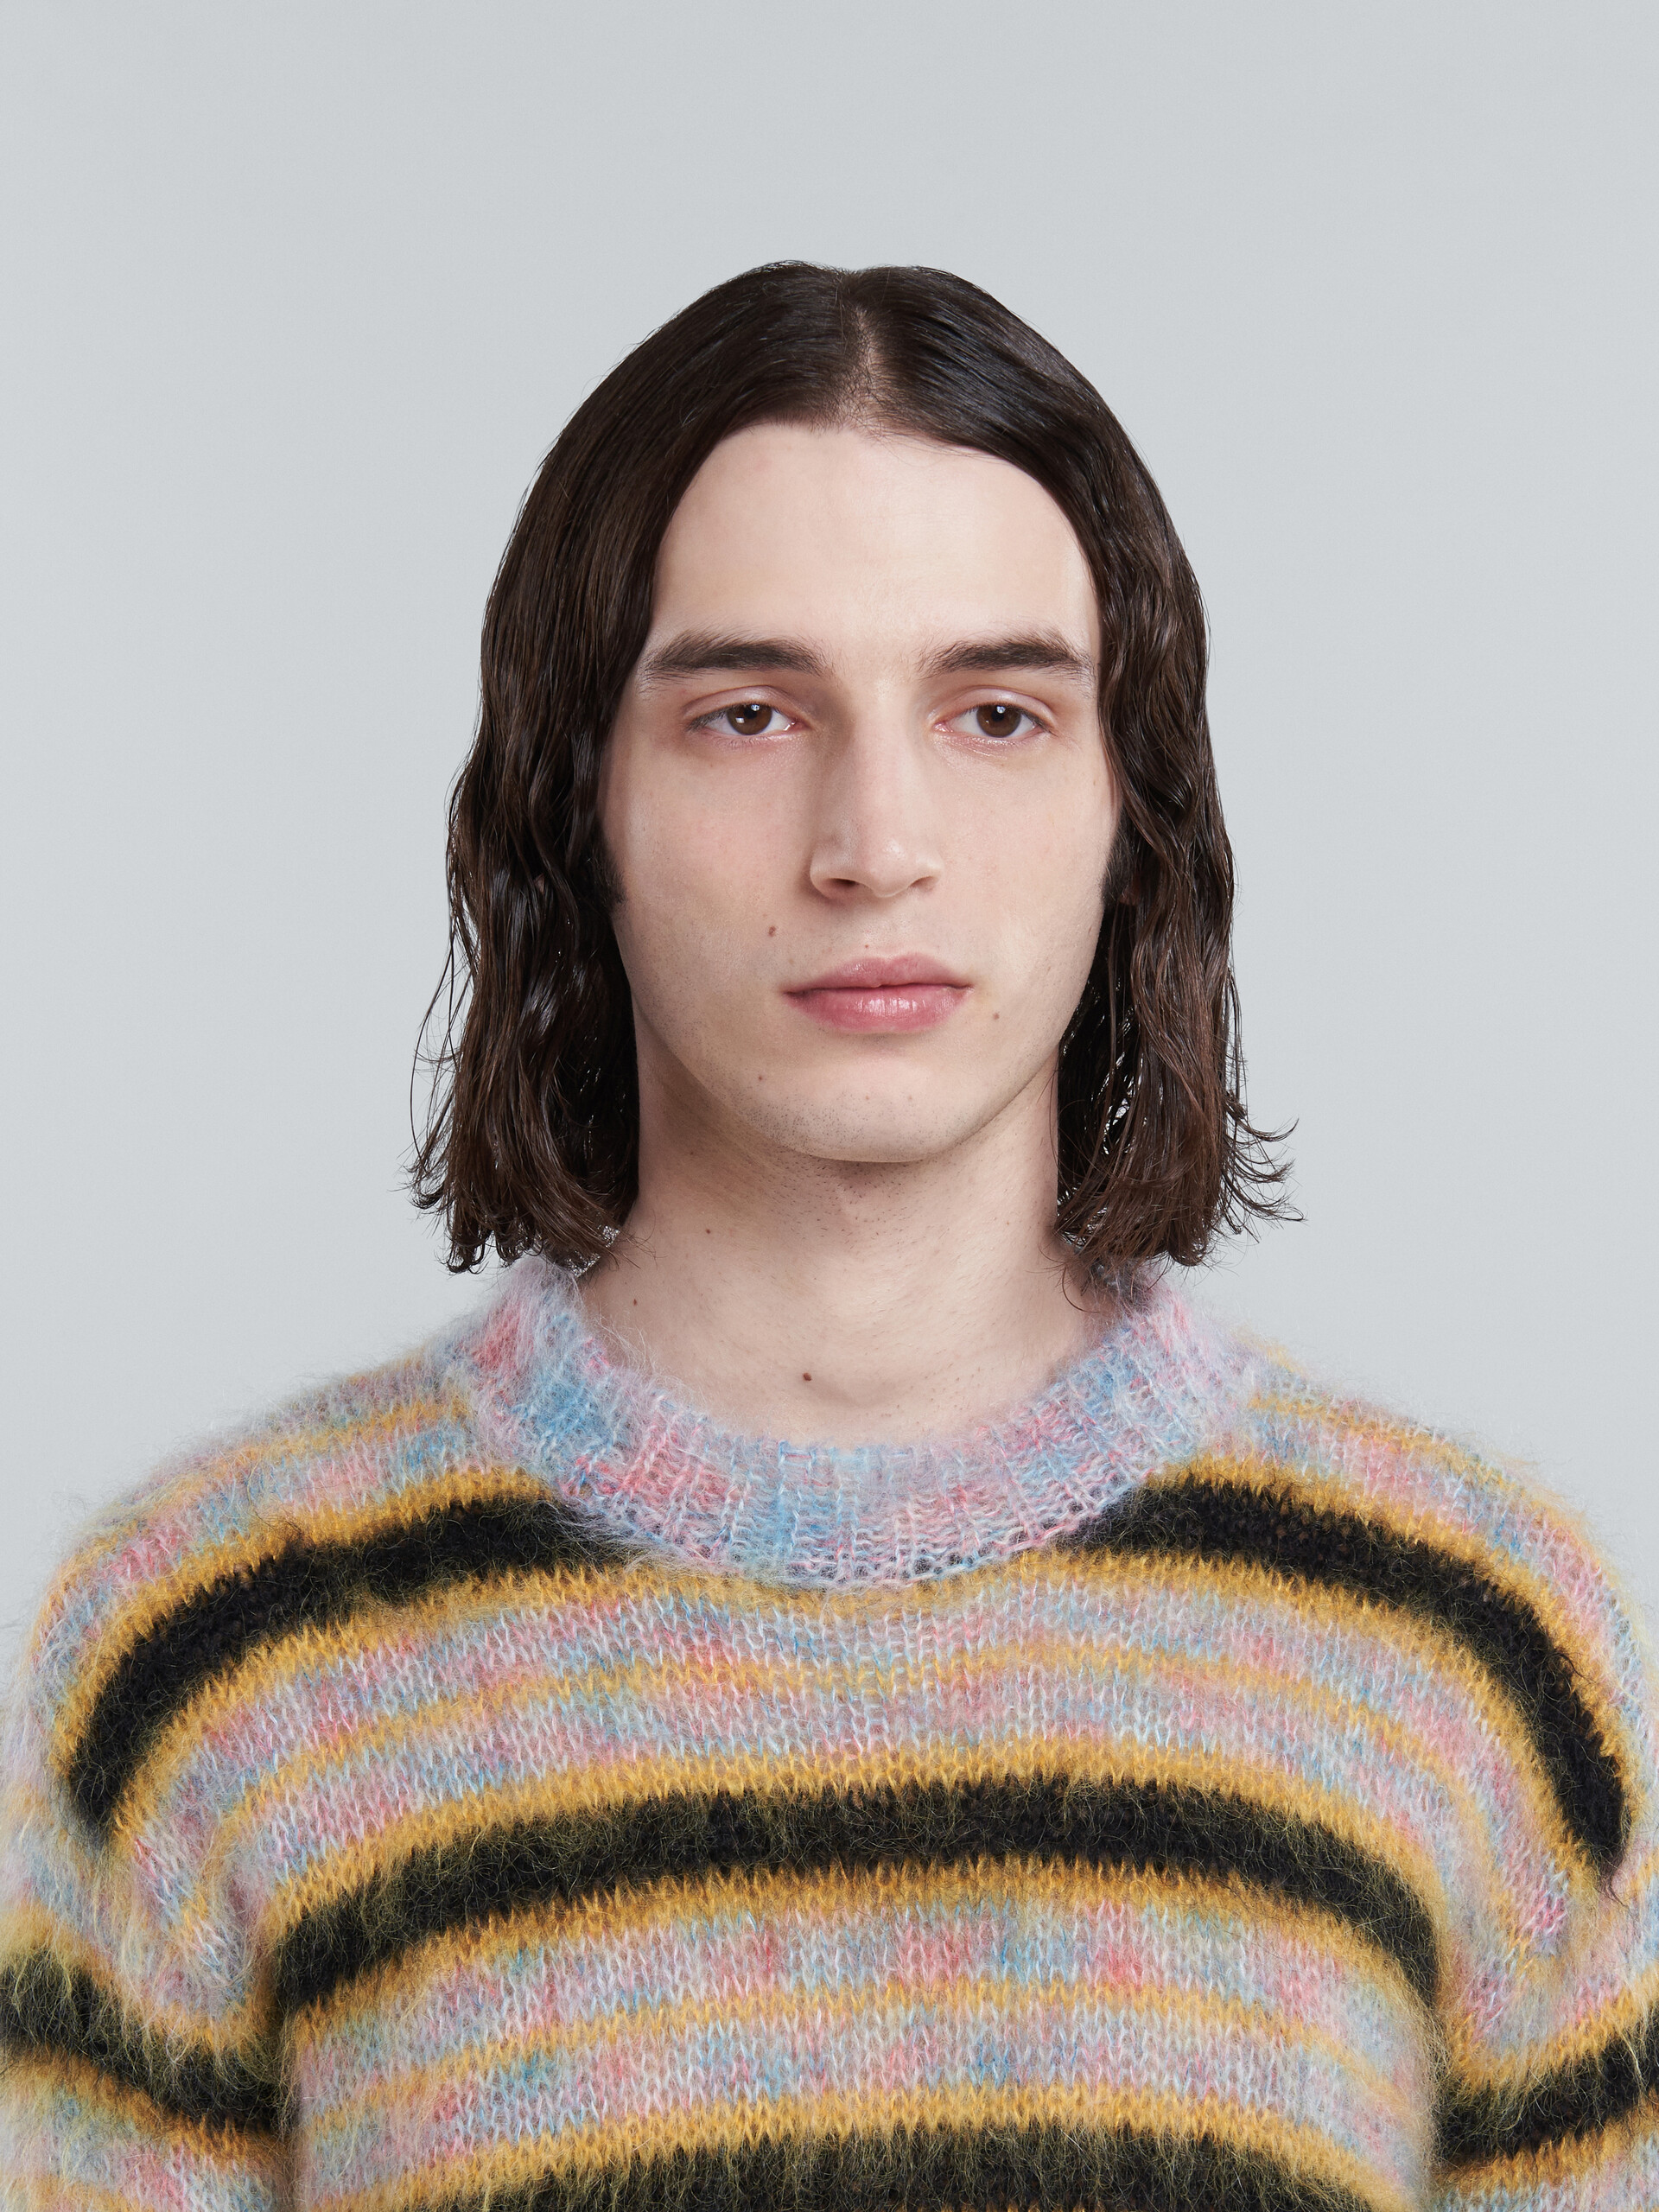 Multicolour striped mohair sweater - Pullovers - Image 4